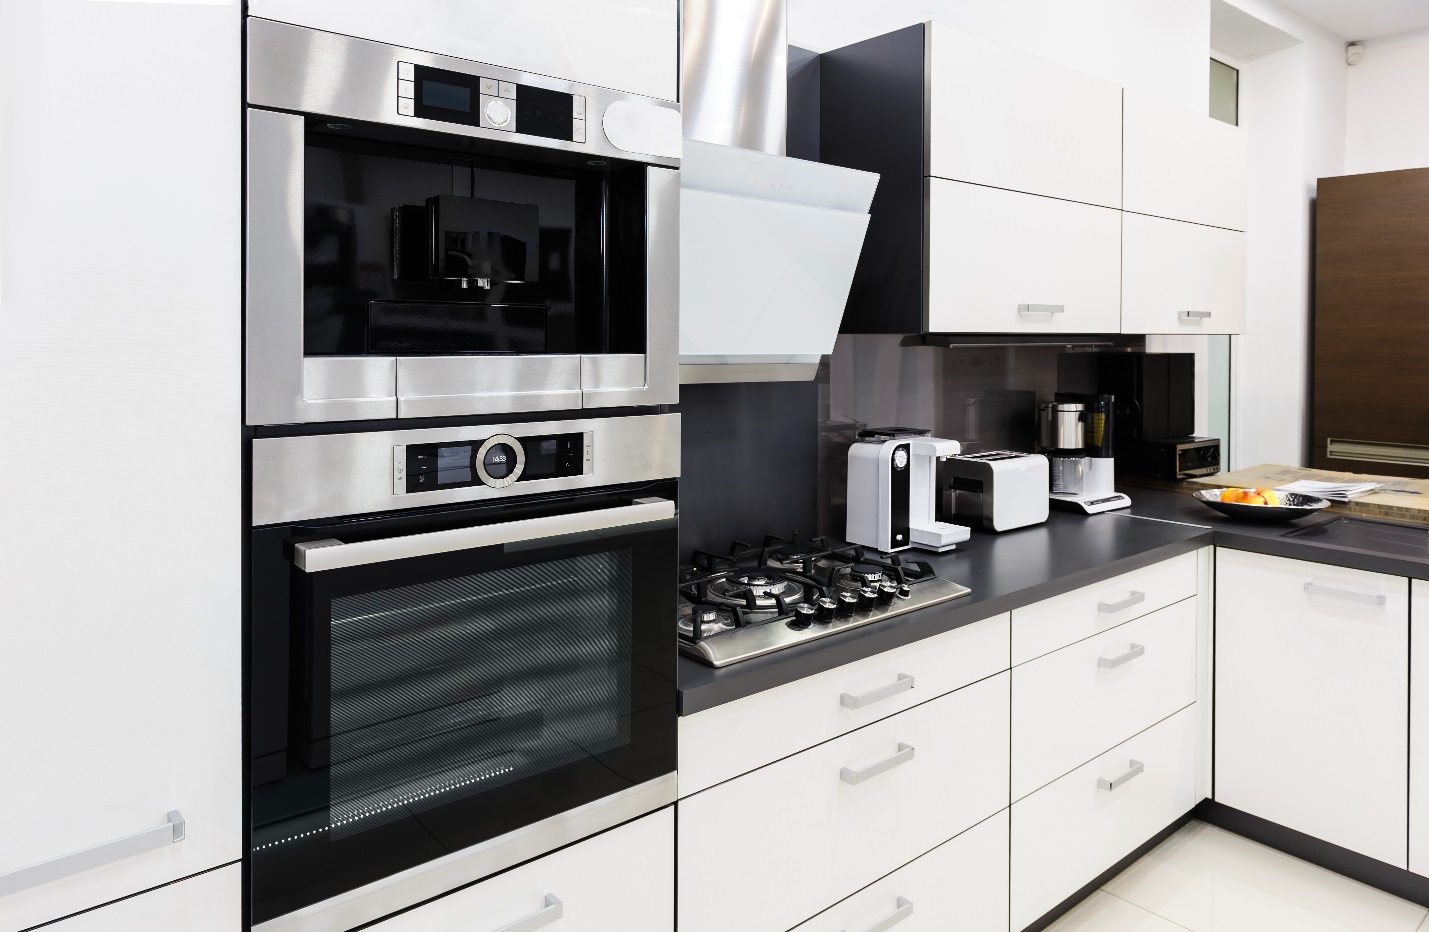 5 Electric Kitchen Appliances You Have To Have - Penna Electric